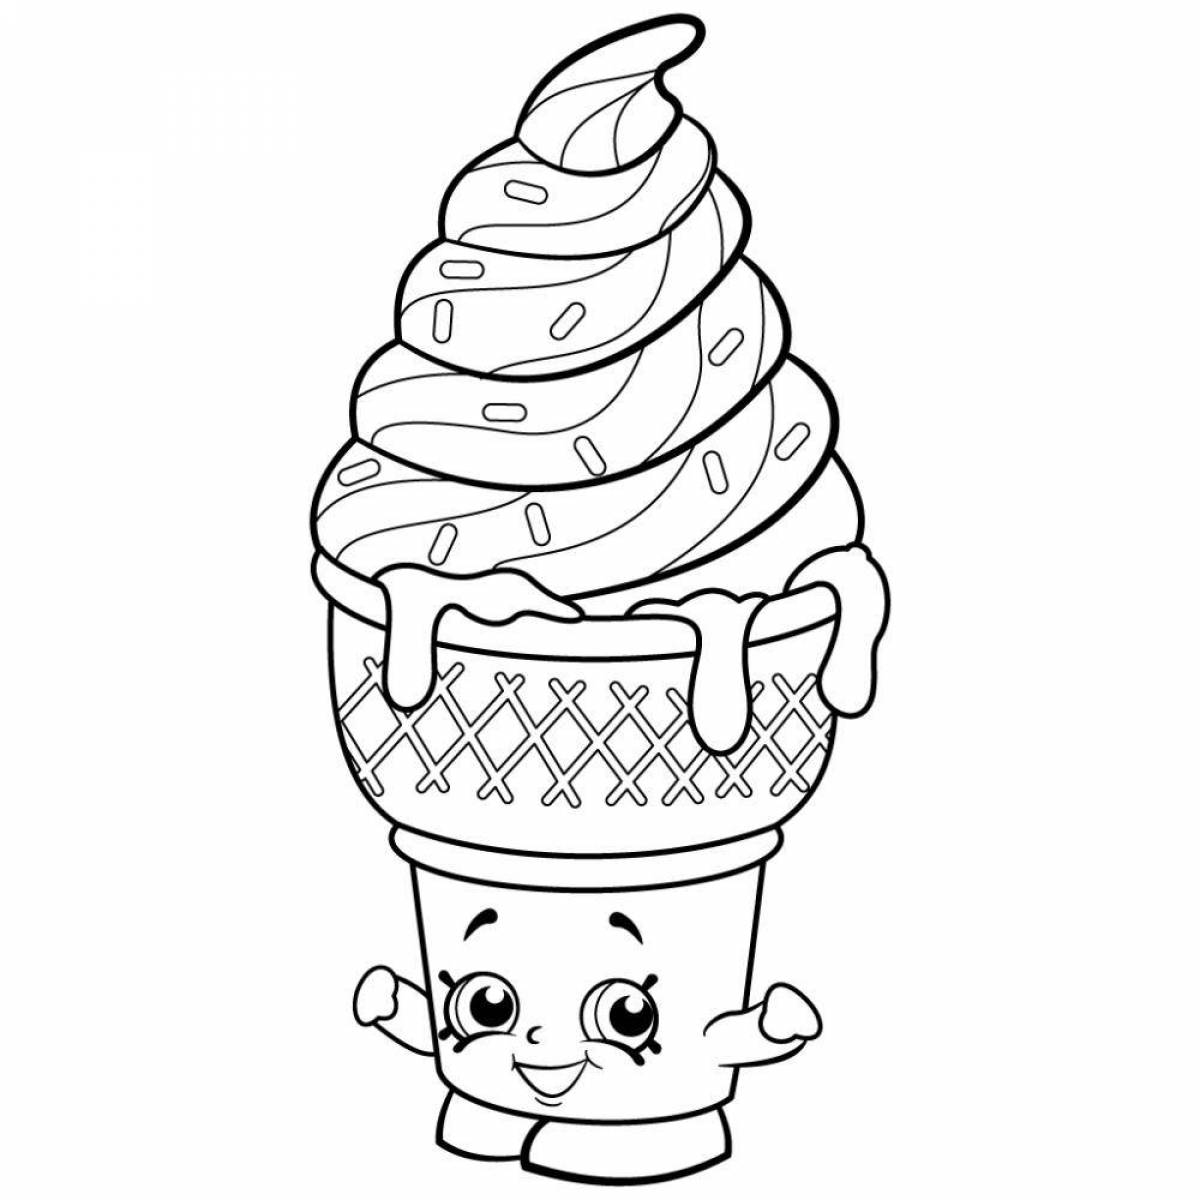 Tempting ice cream coloring page